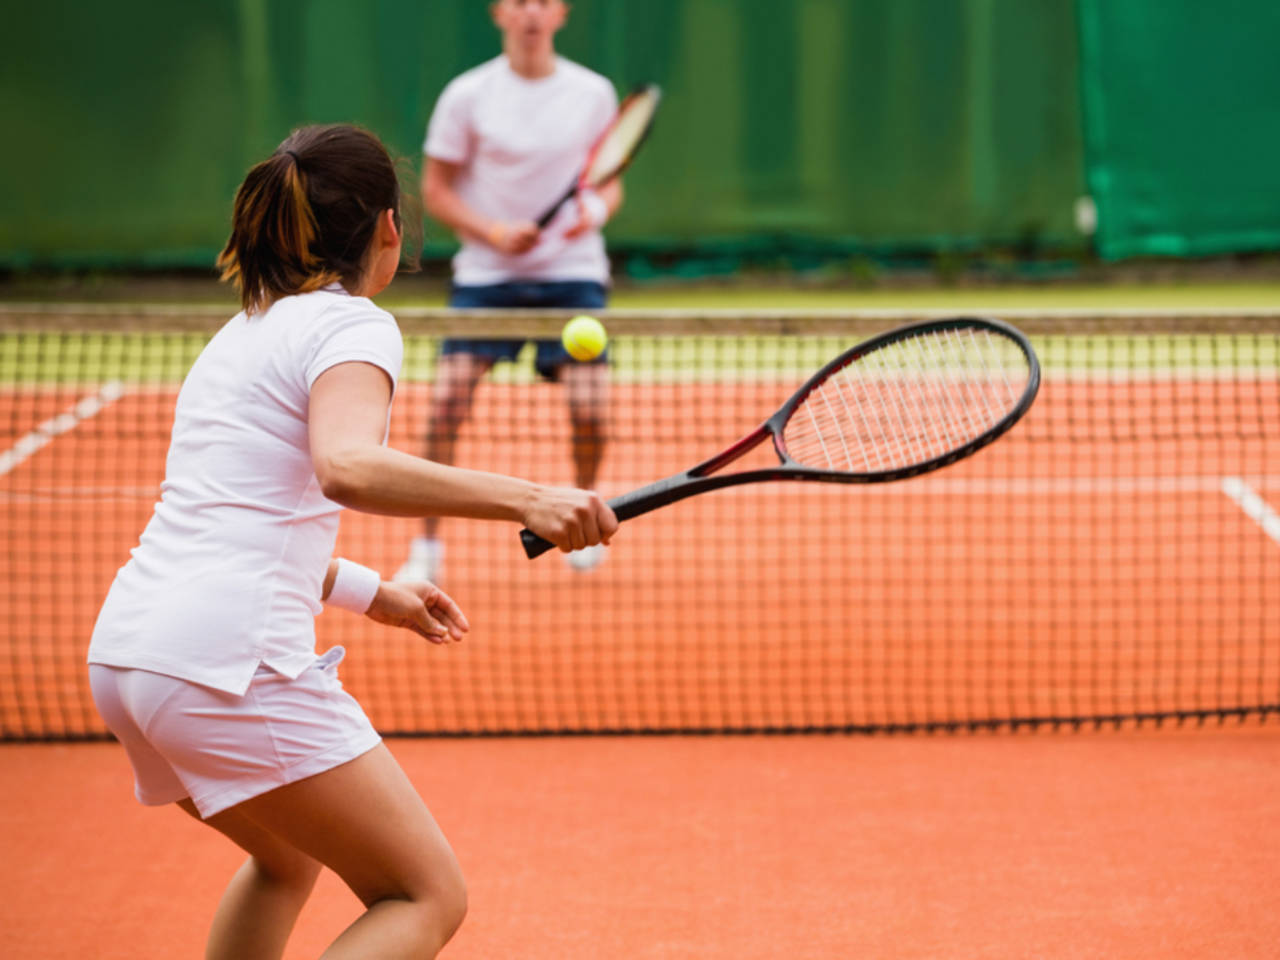 Weight loss: How can you lose weight by playing tennis - Times of India